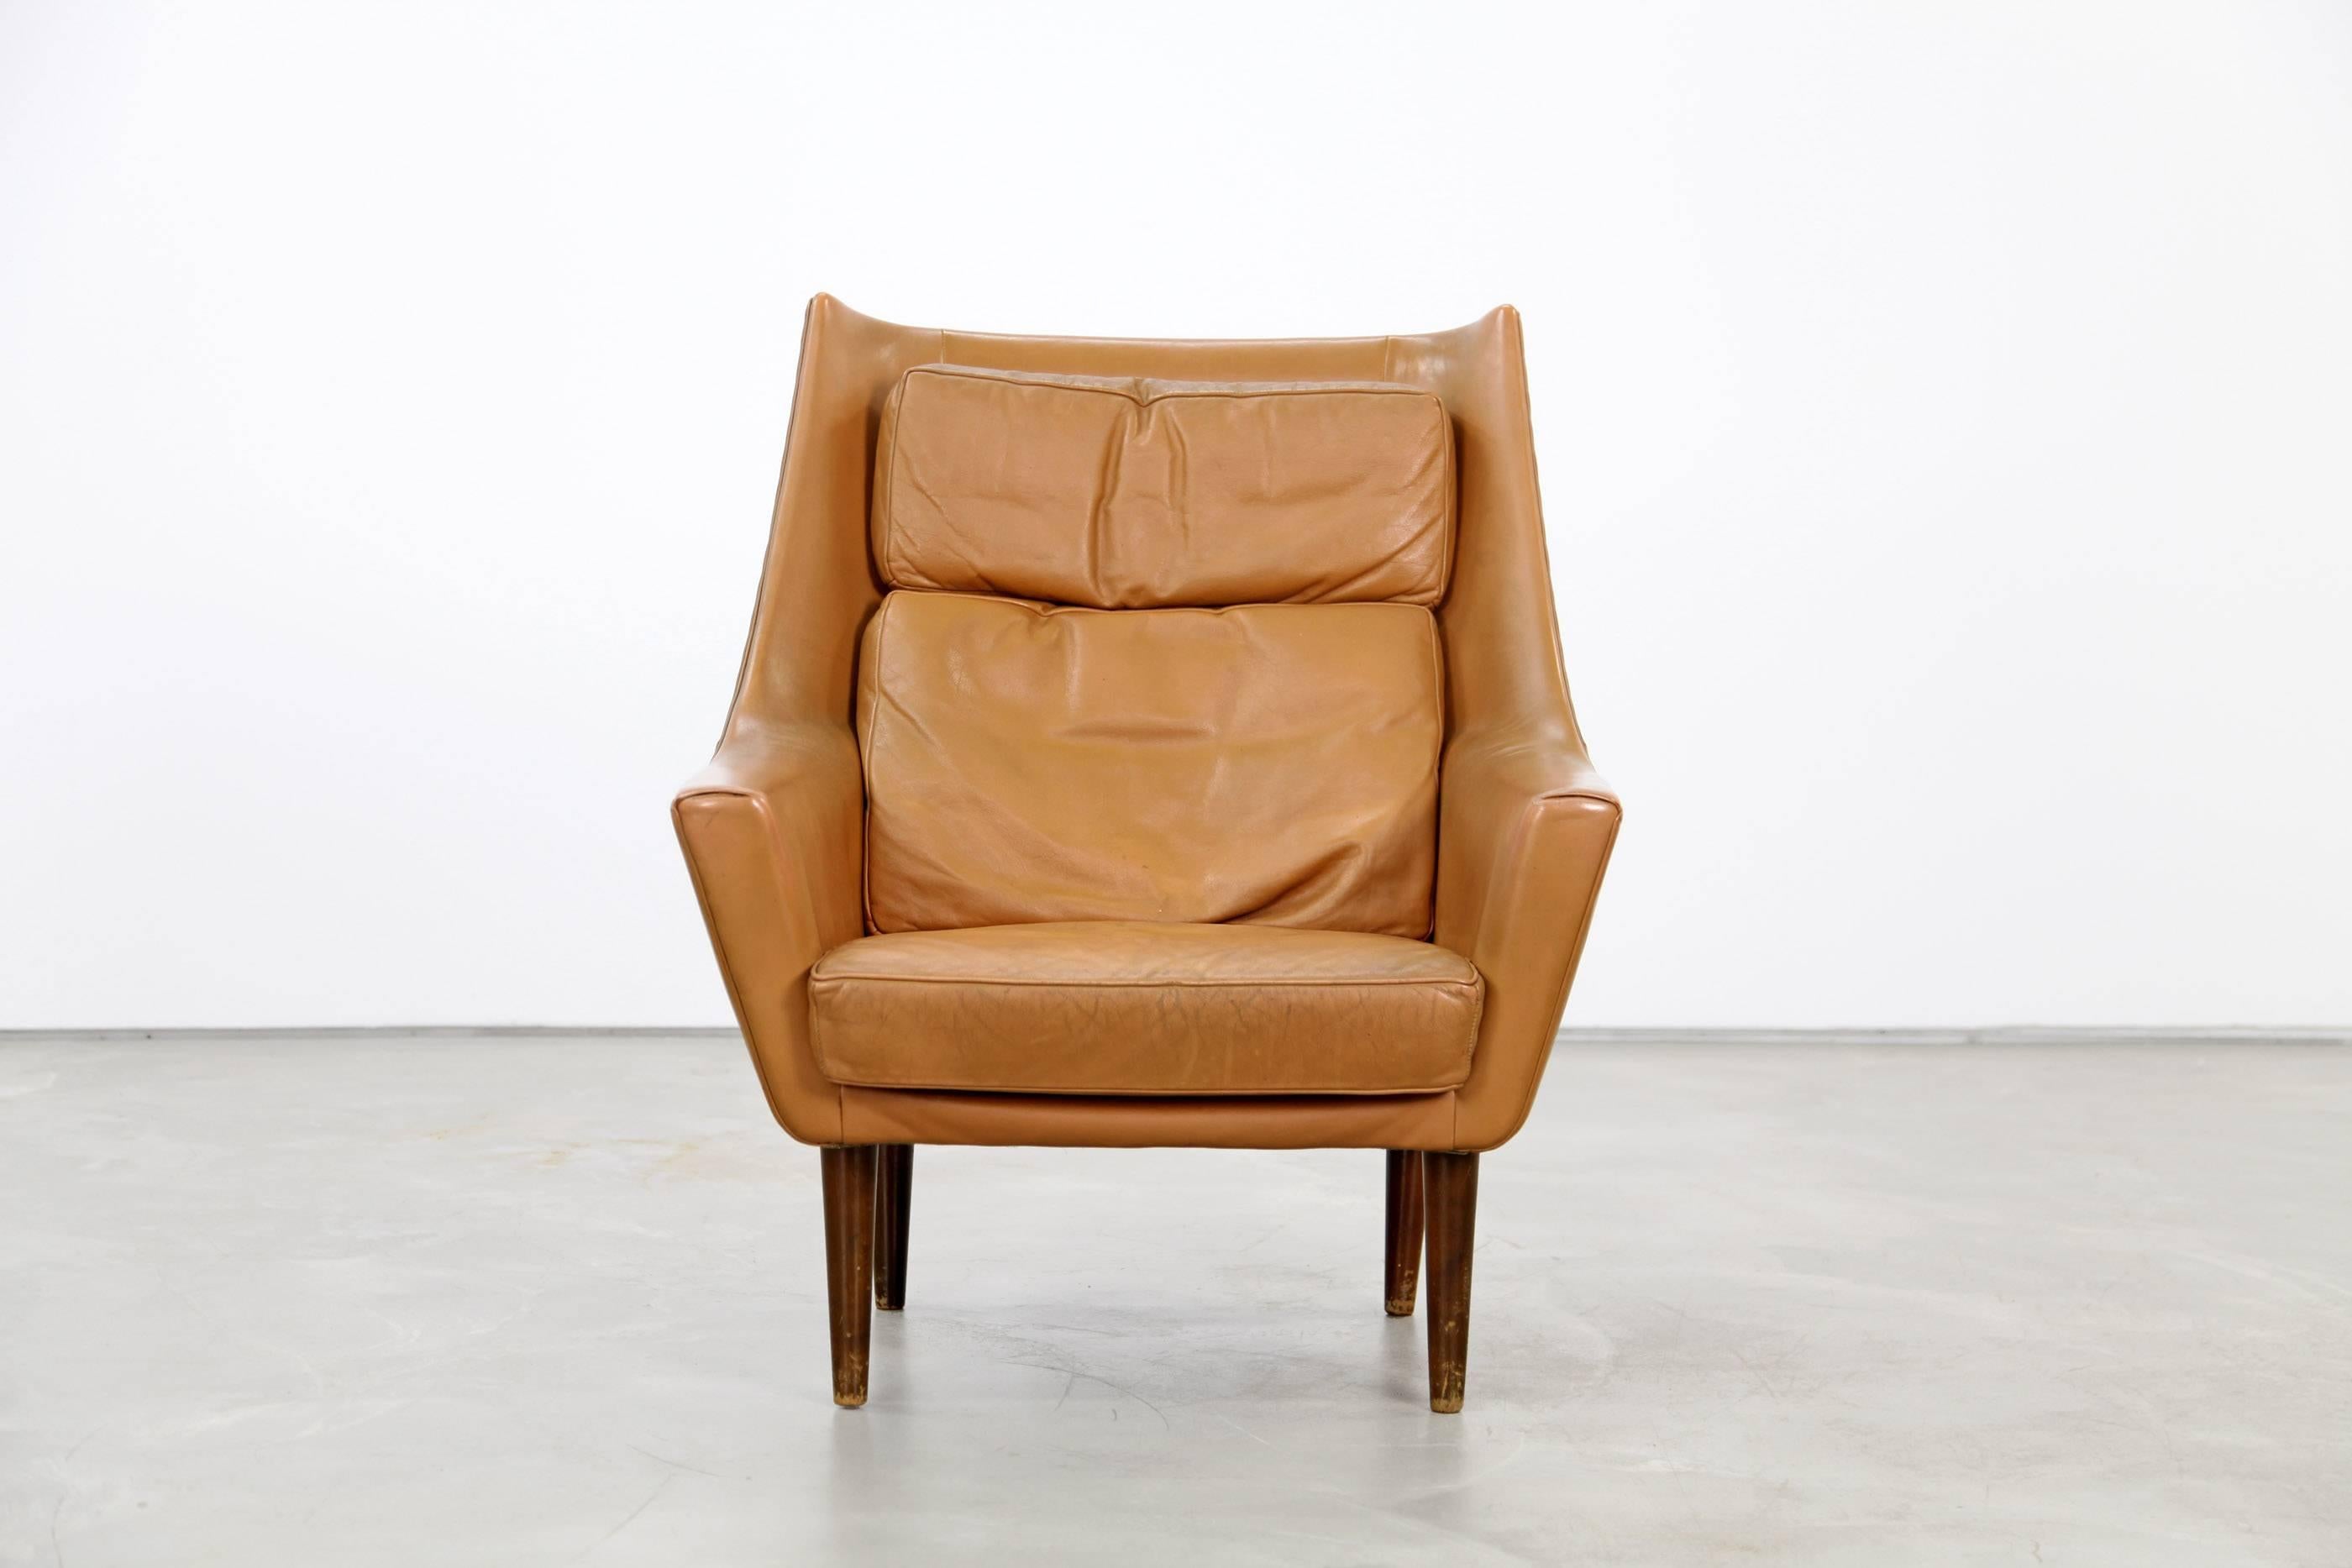 Beautiful leather lounge chair from the 1960s. This chair was produced in Denmark, the design is attributed to Hans Olsen. The chair is upholstered in cognac-colored original leather and is in beautifully patinated condition. We have two matching